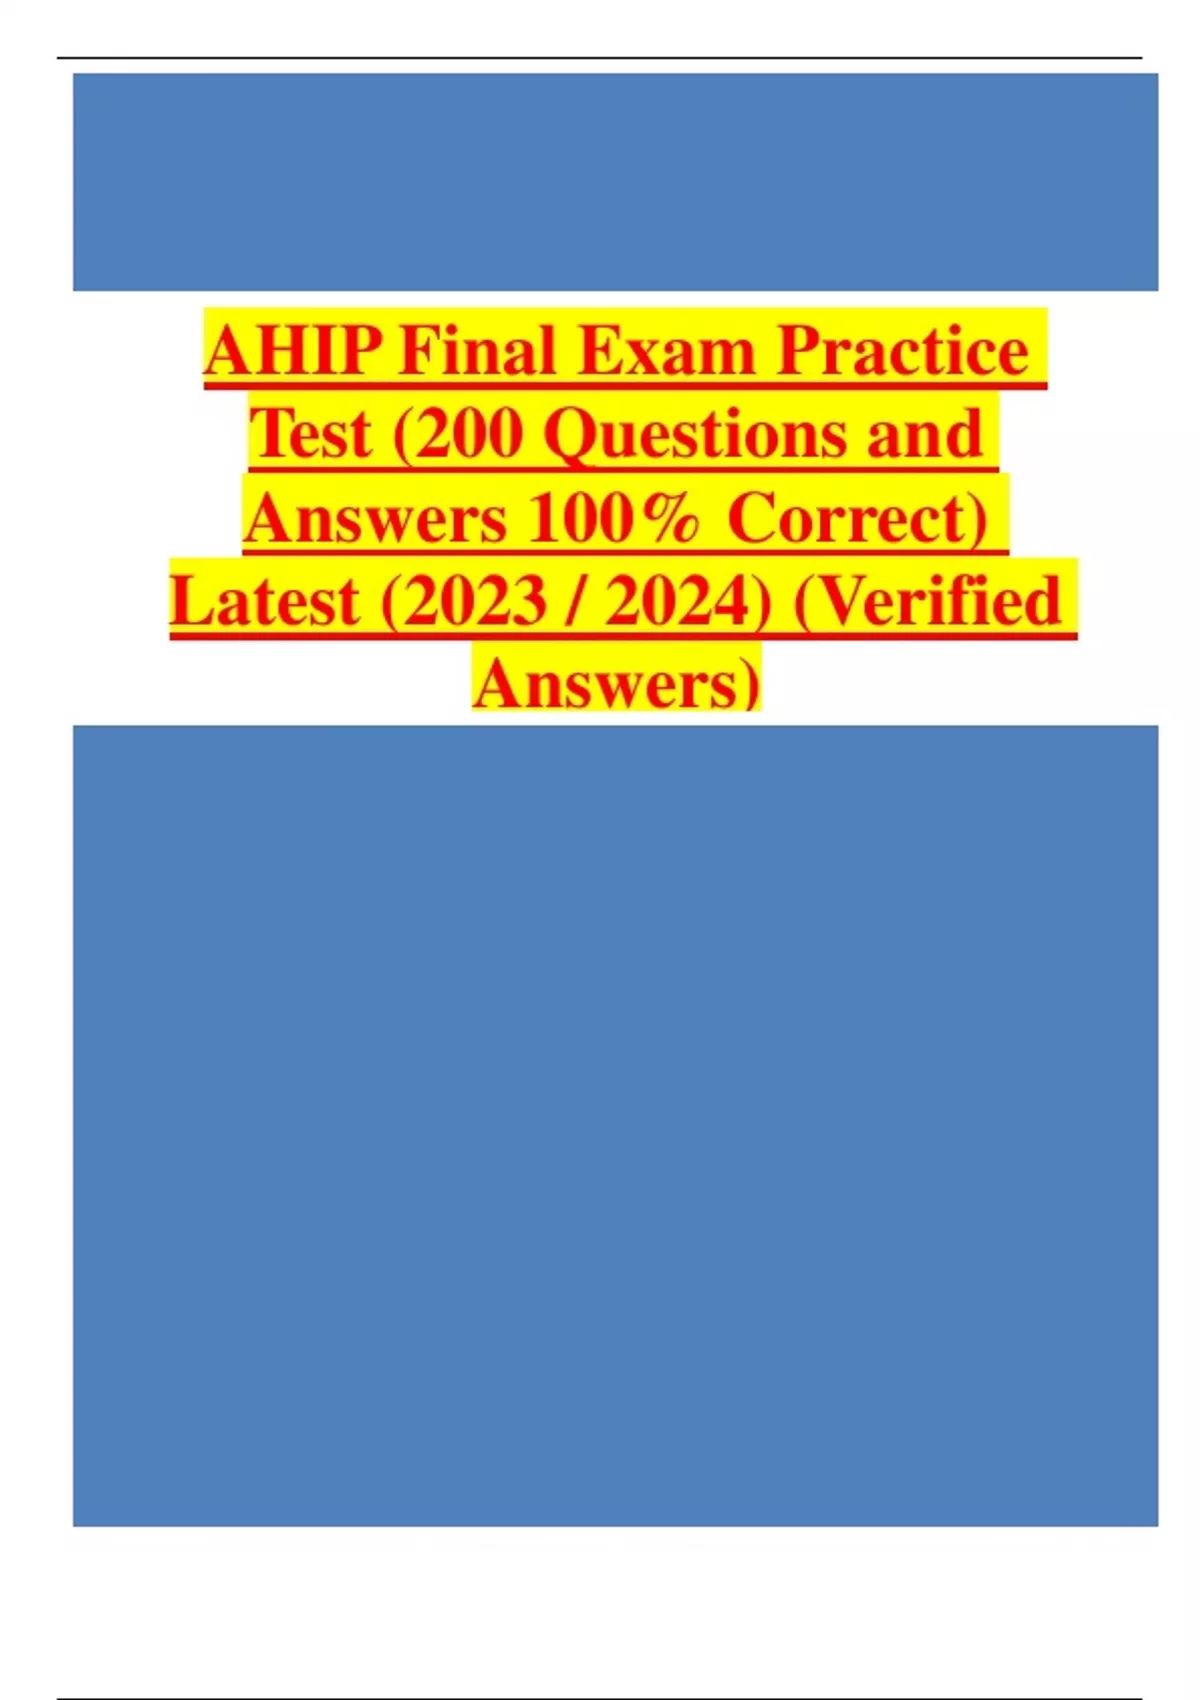 AHIP Final Exam Practice Test (200 Questions and Answers 100 Correct